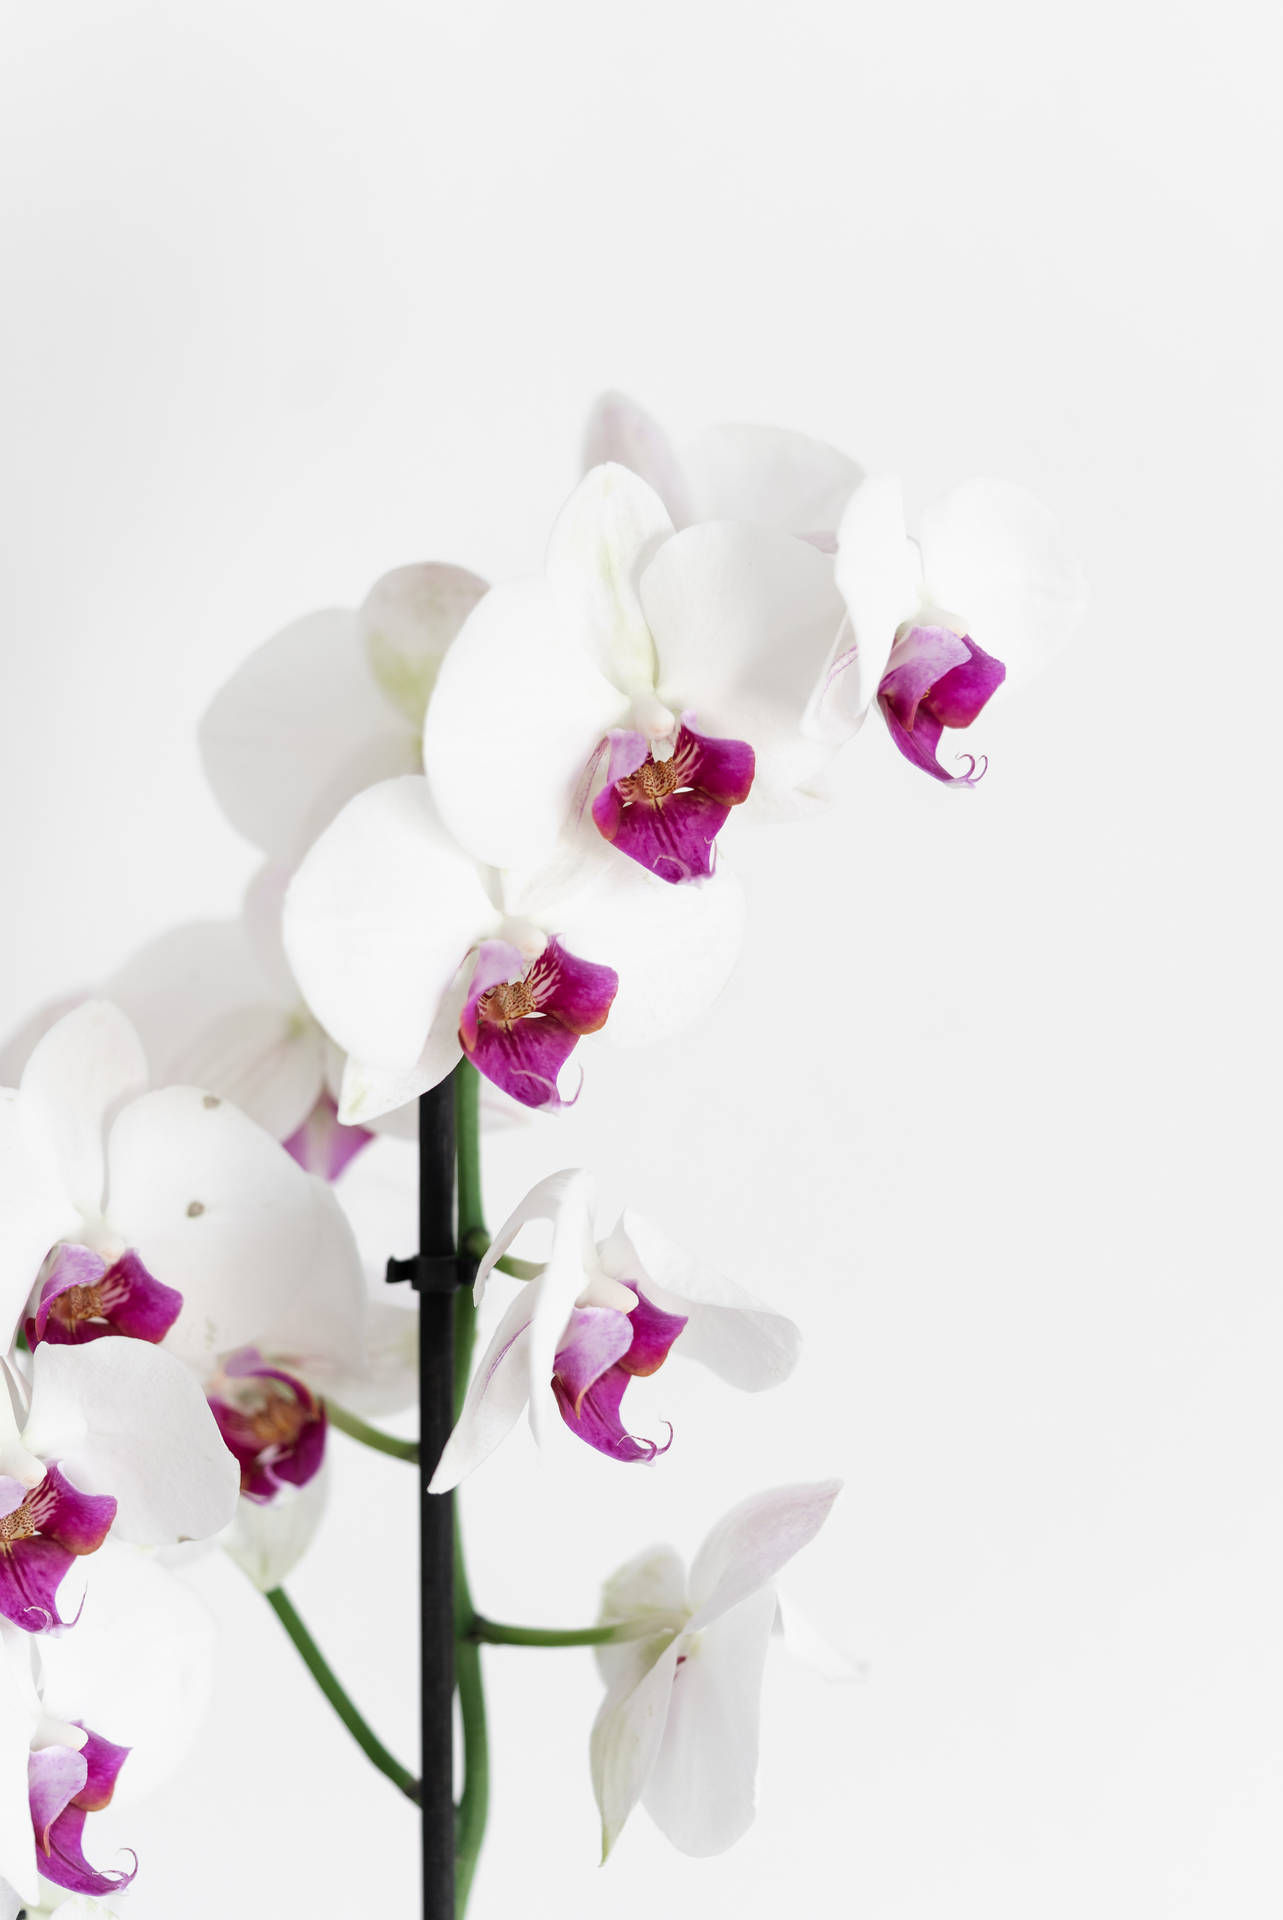 Phalaenopsis Aphrodite Orchid Flower Android